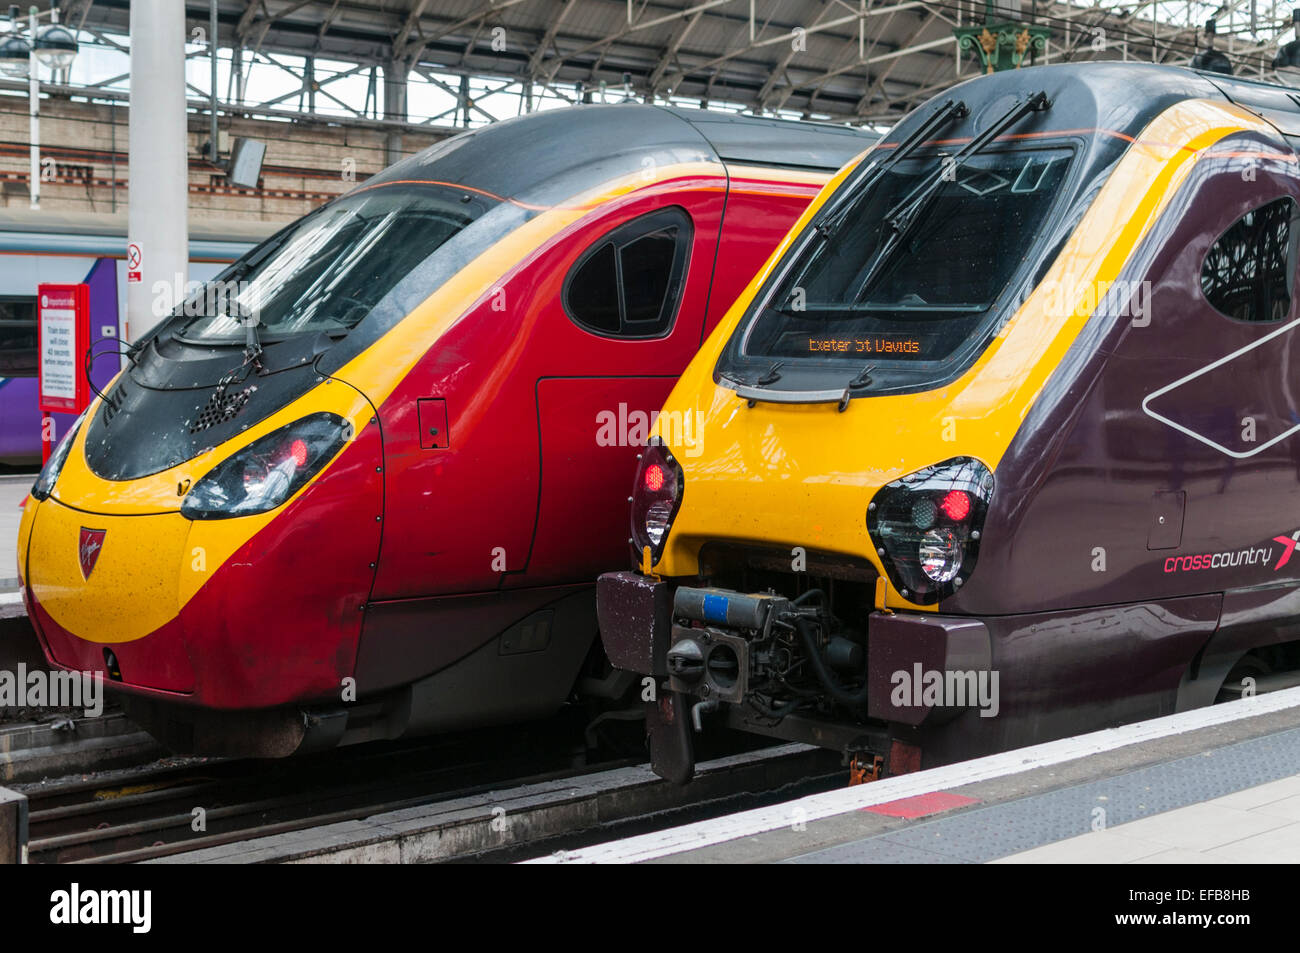 Virgin trains Pendolino and Cross Country Voyager high speed trains side by side at Manchester Piccadilly railway station Stock Photo